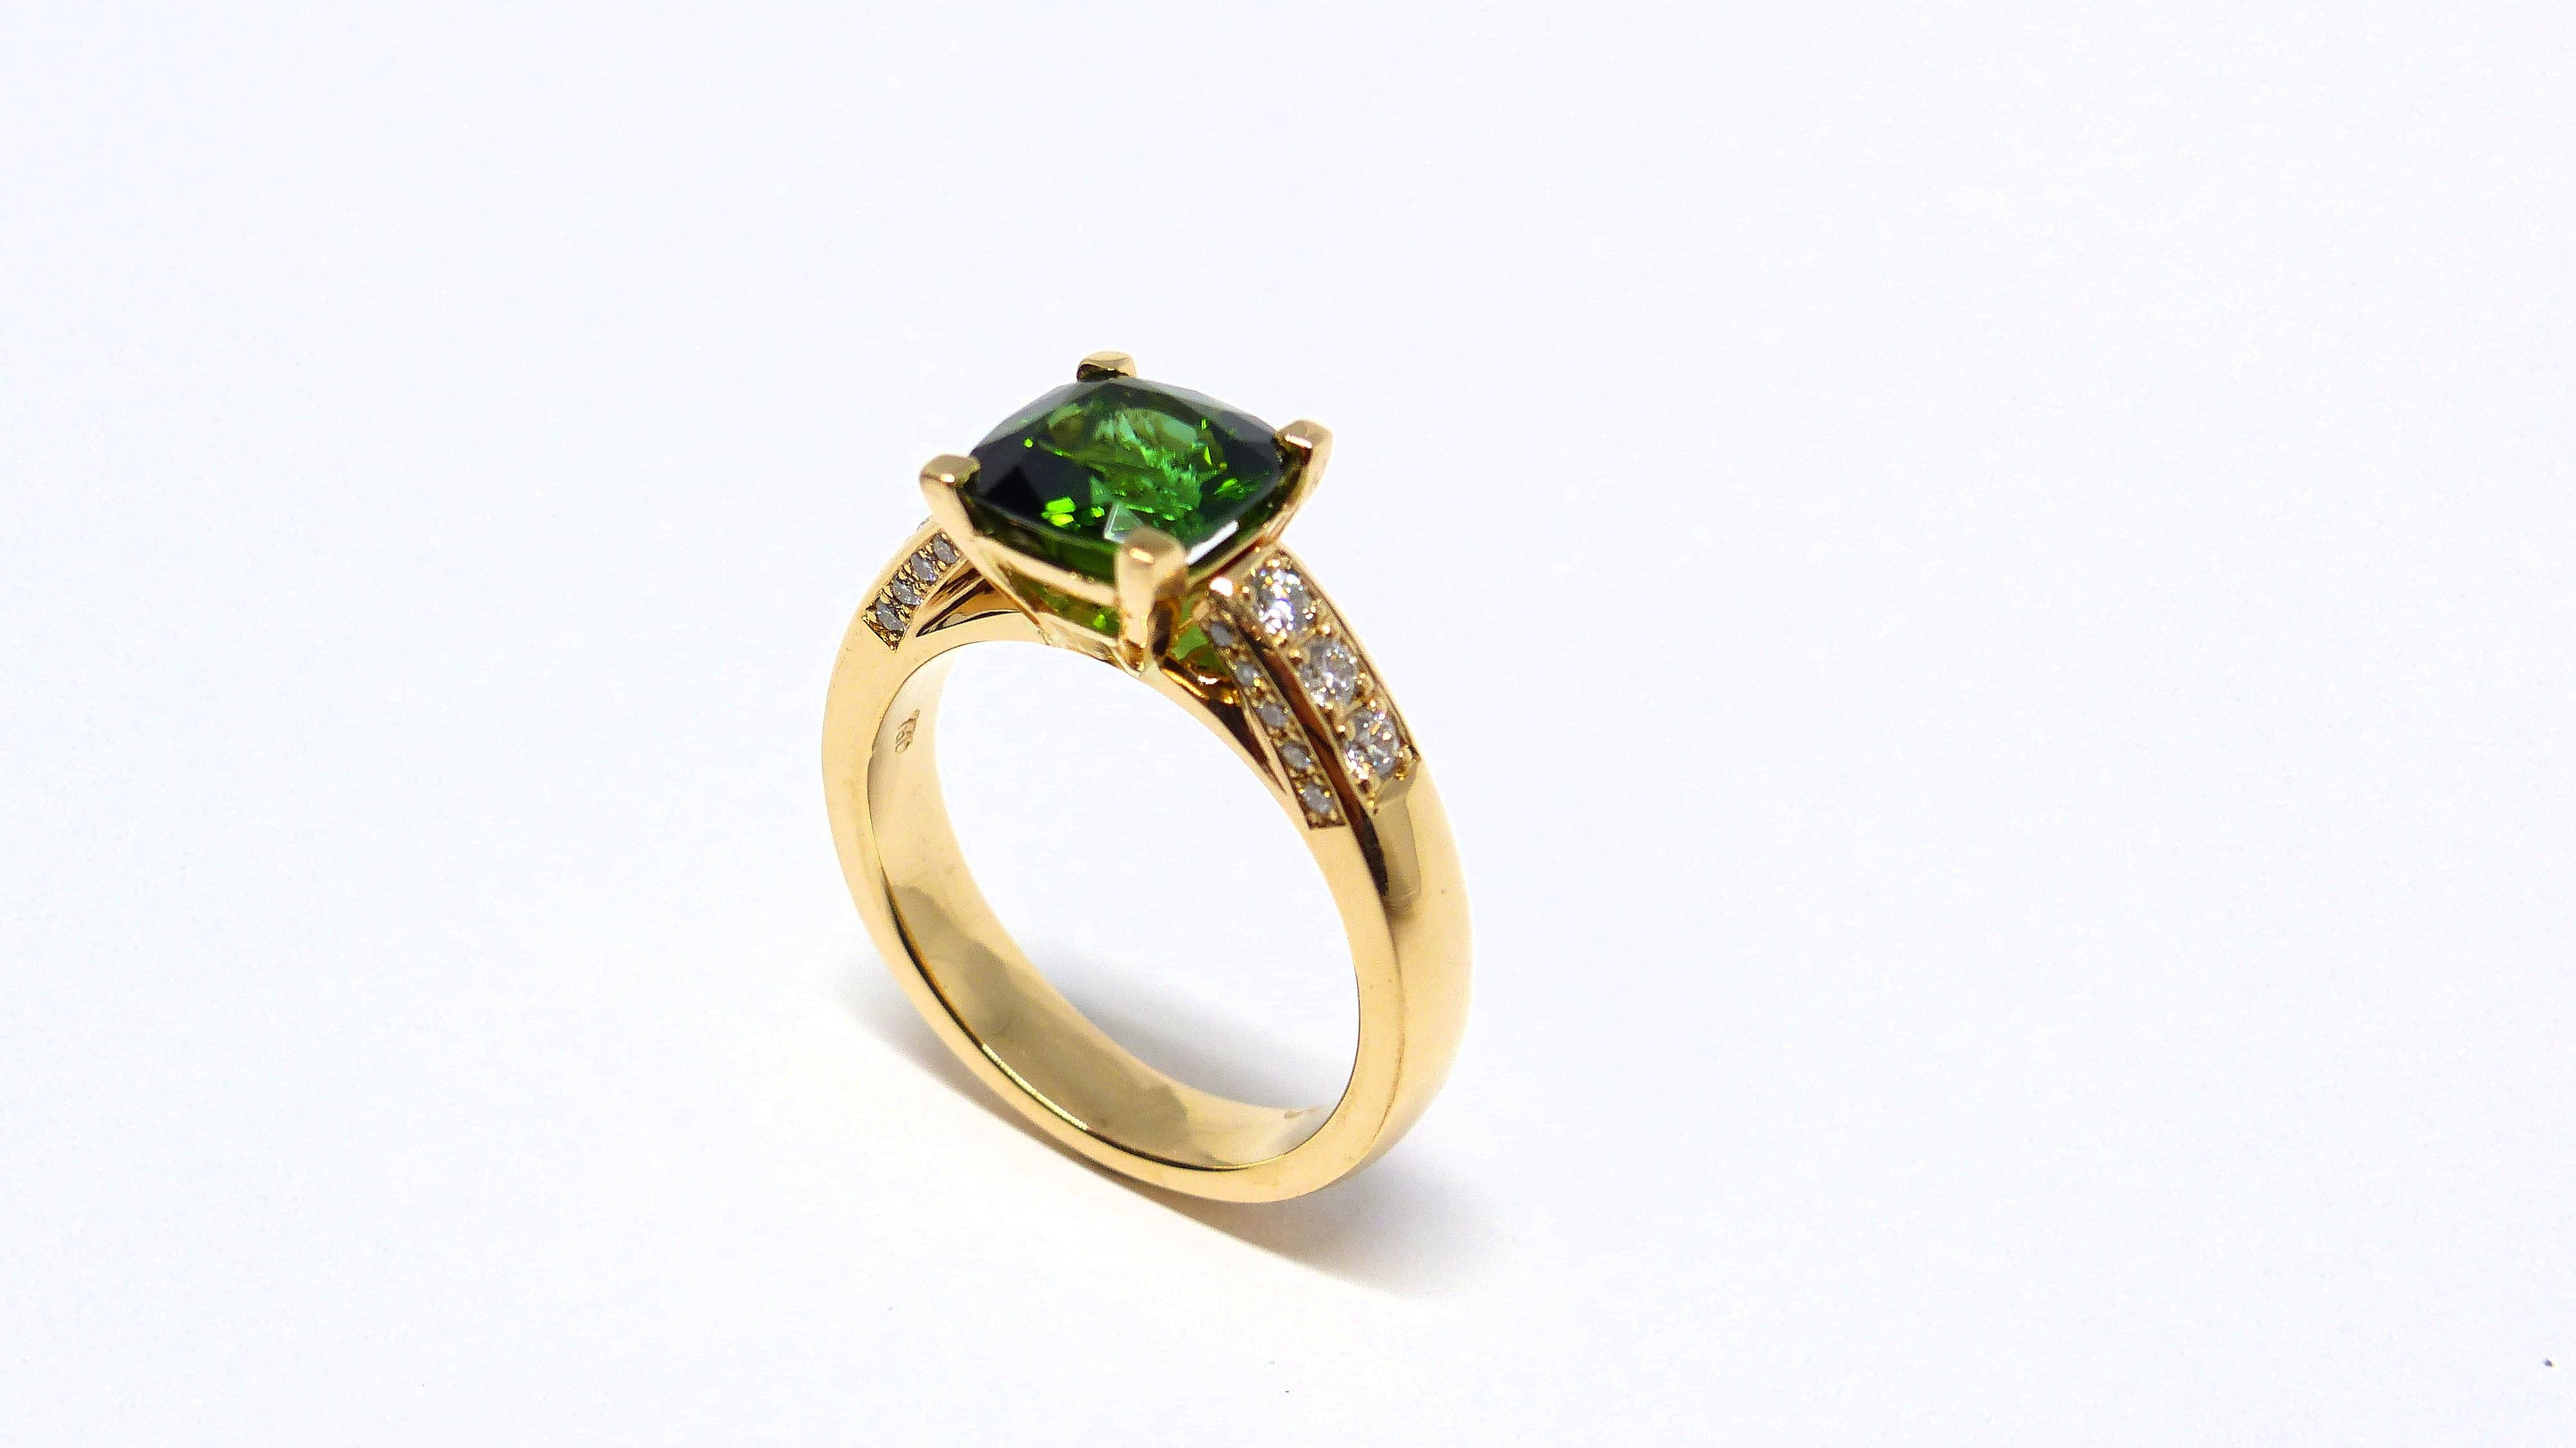 Thomas Leyser is renowned for his contemporary jewellery designs utilizing fine gemstones. 

This 18k rose gold (6.60g) ring is set with 1x fine intense green Tourmaline (facetted, cushion, 7.5mm, 1.85ct) + 26x Diamonds (brilliant-cut, 1-2mm, G/VS,